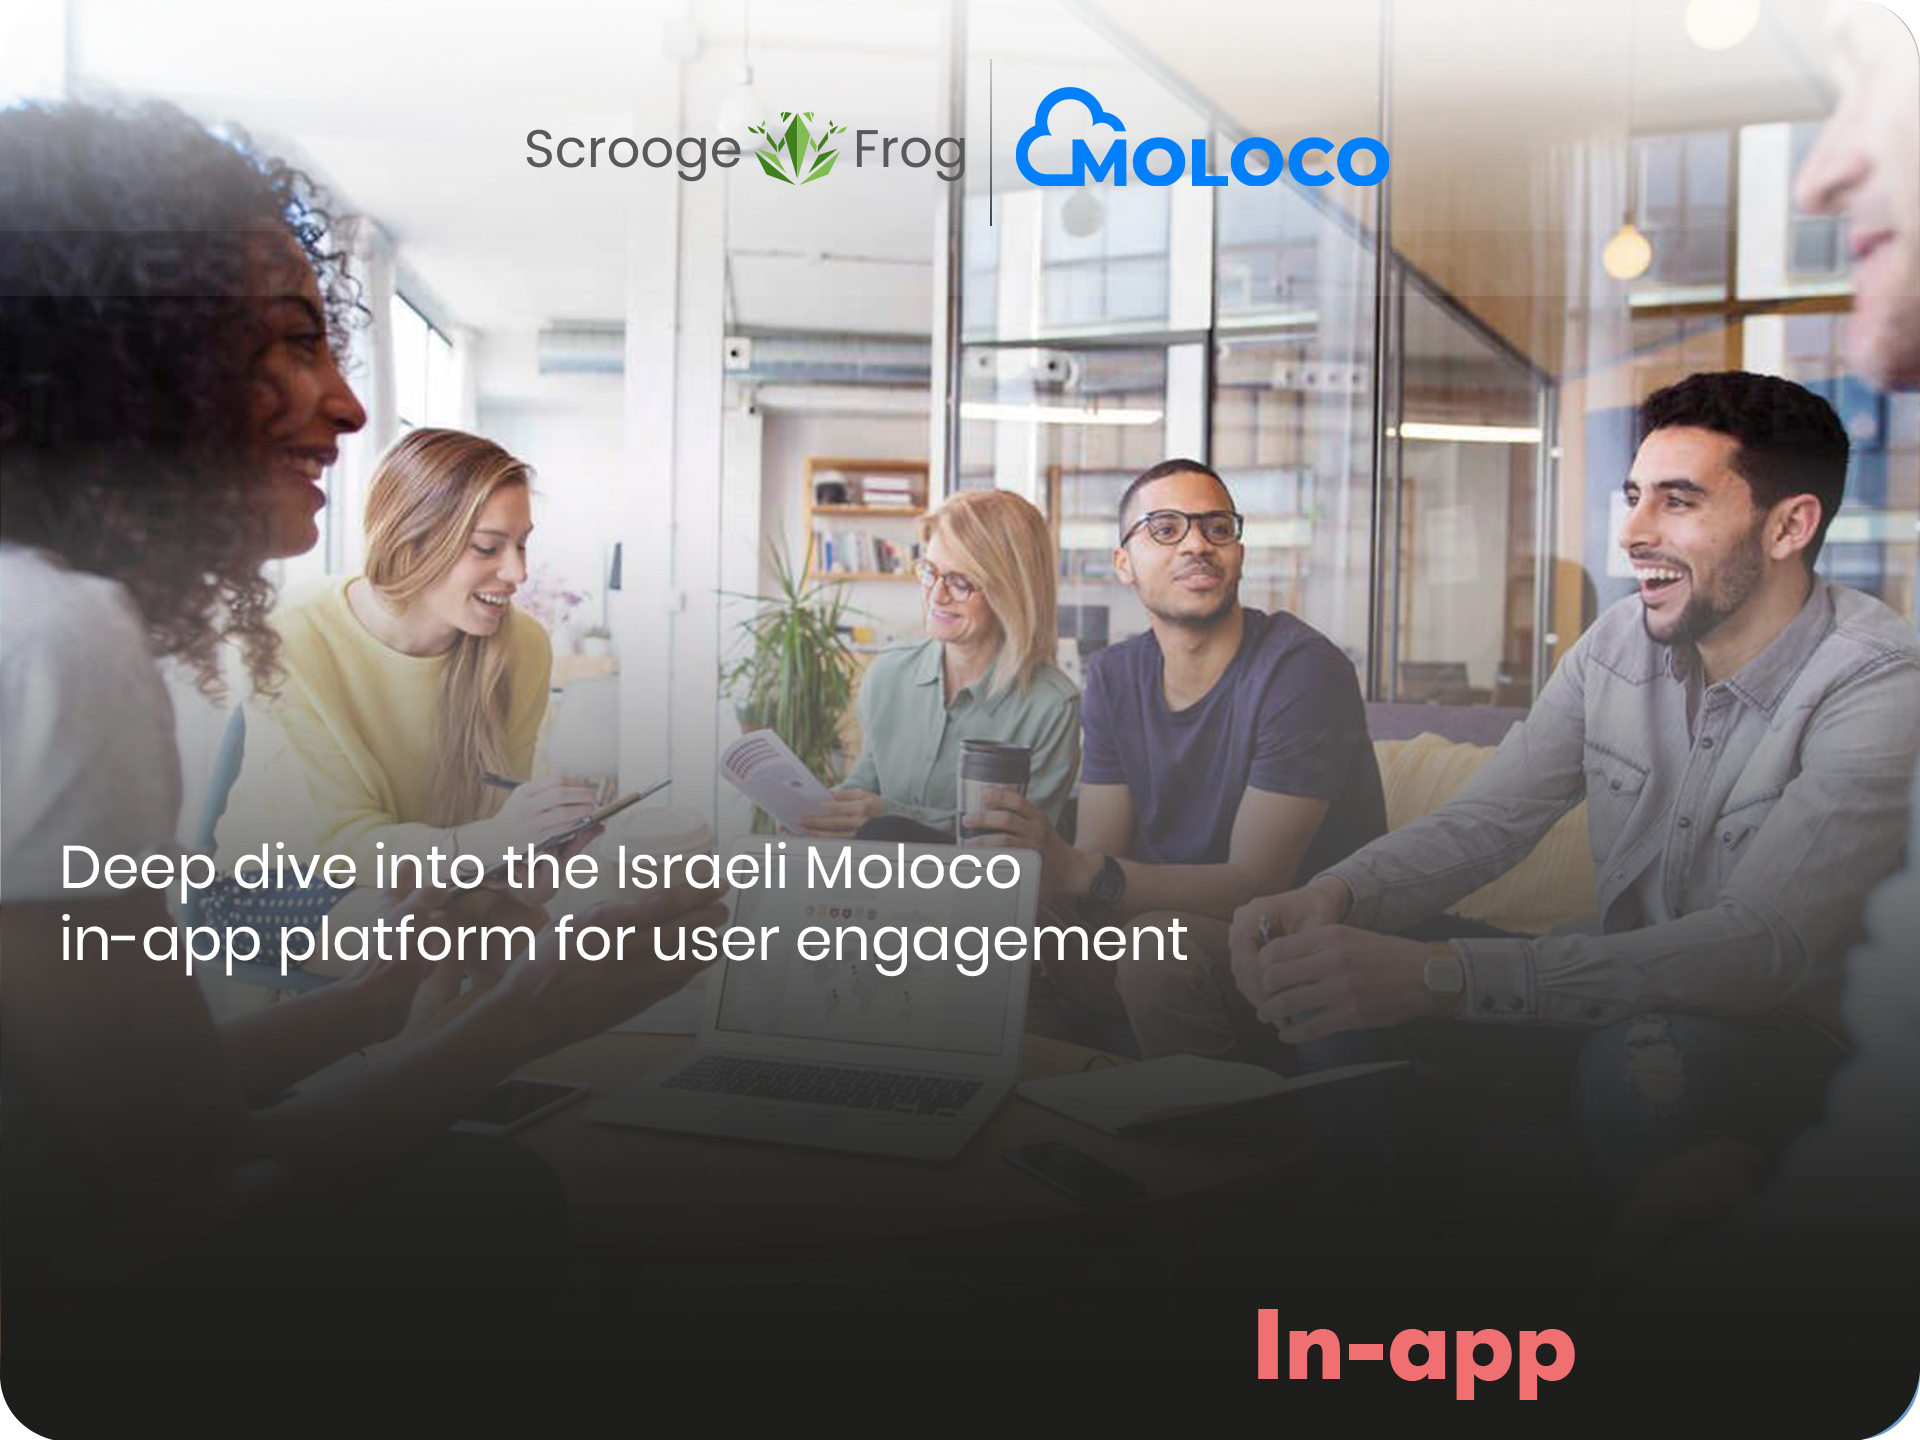 Deep dive into the Israeli Moloco in-app platform for user engagement